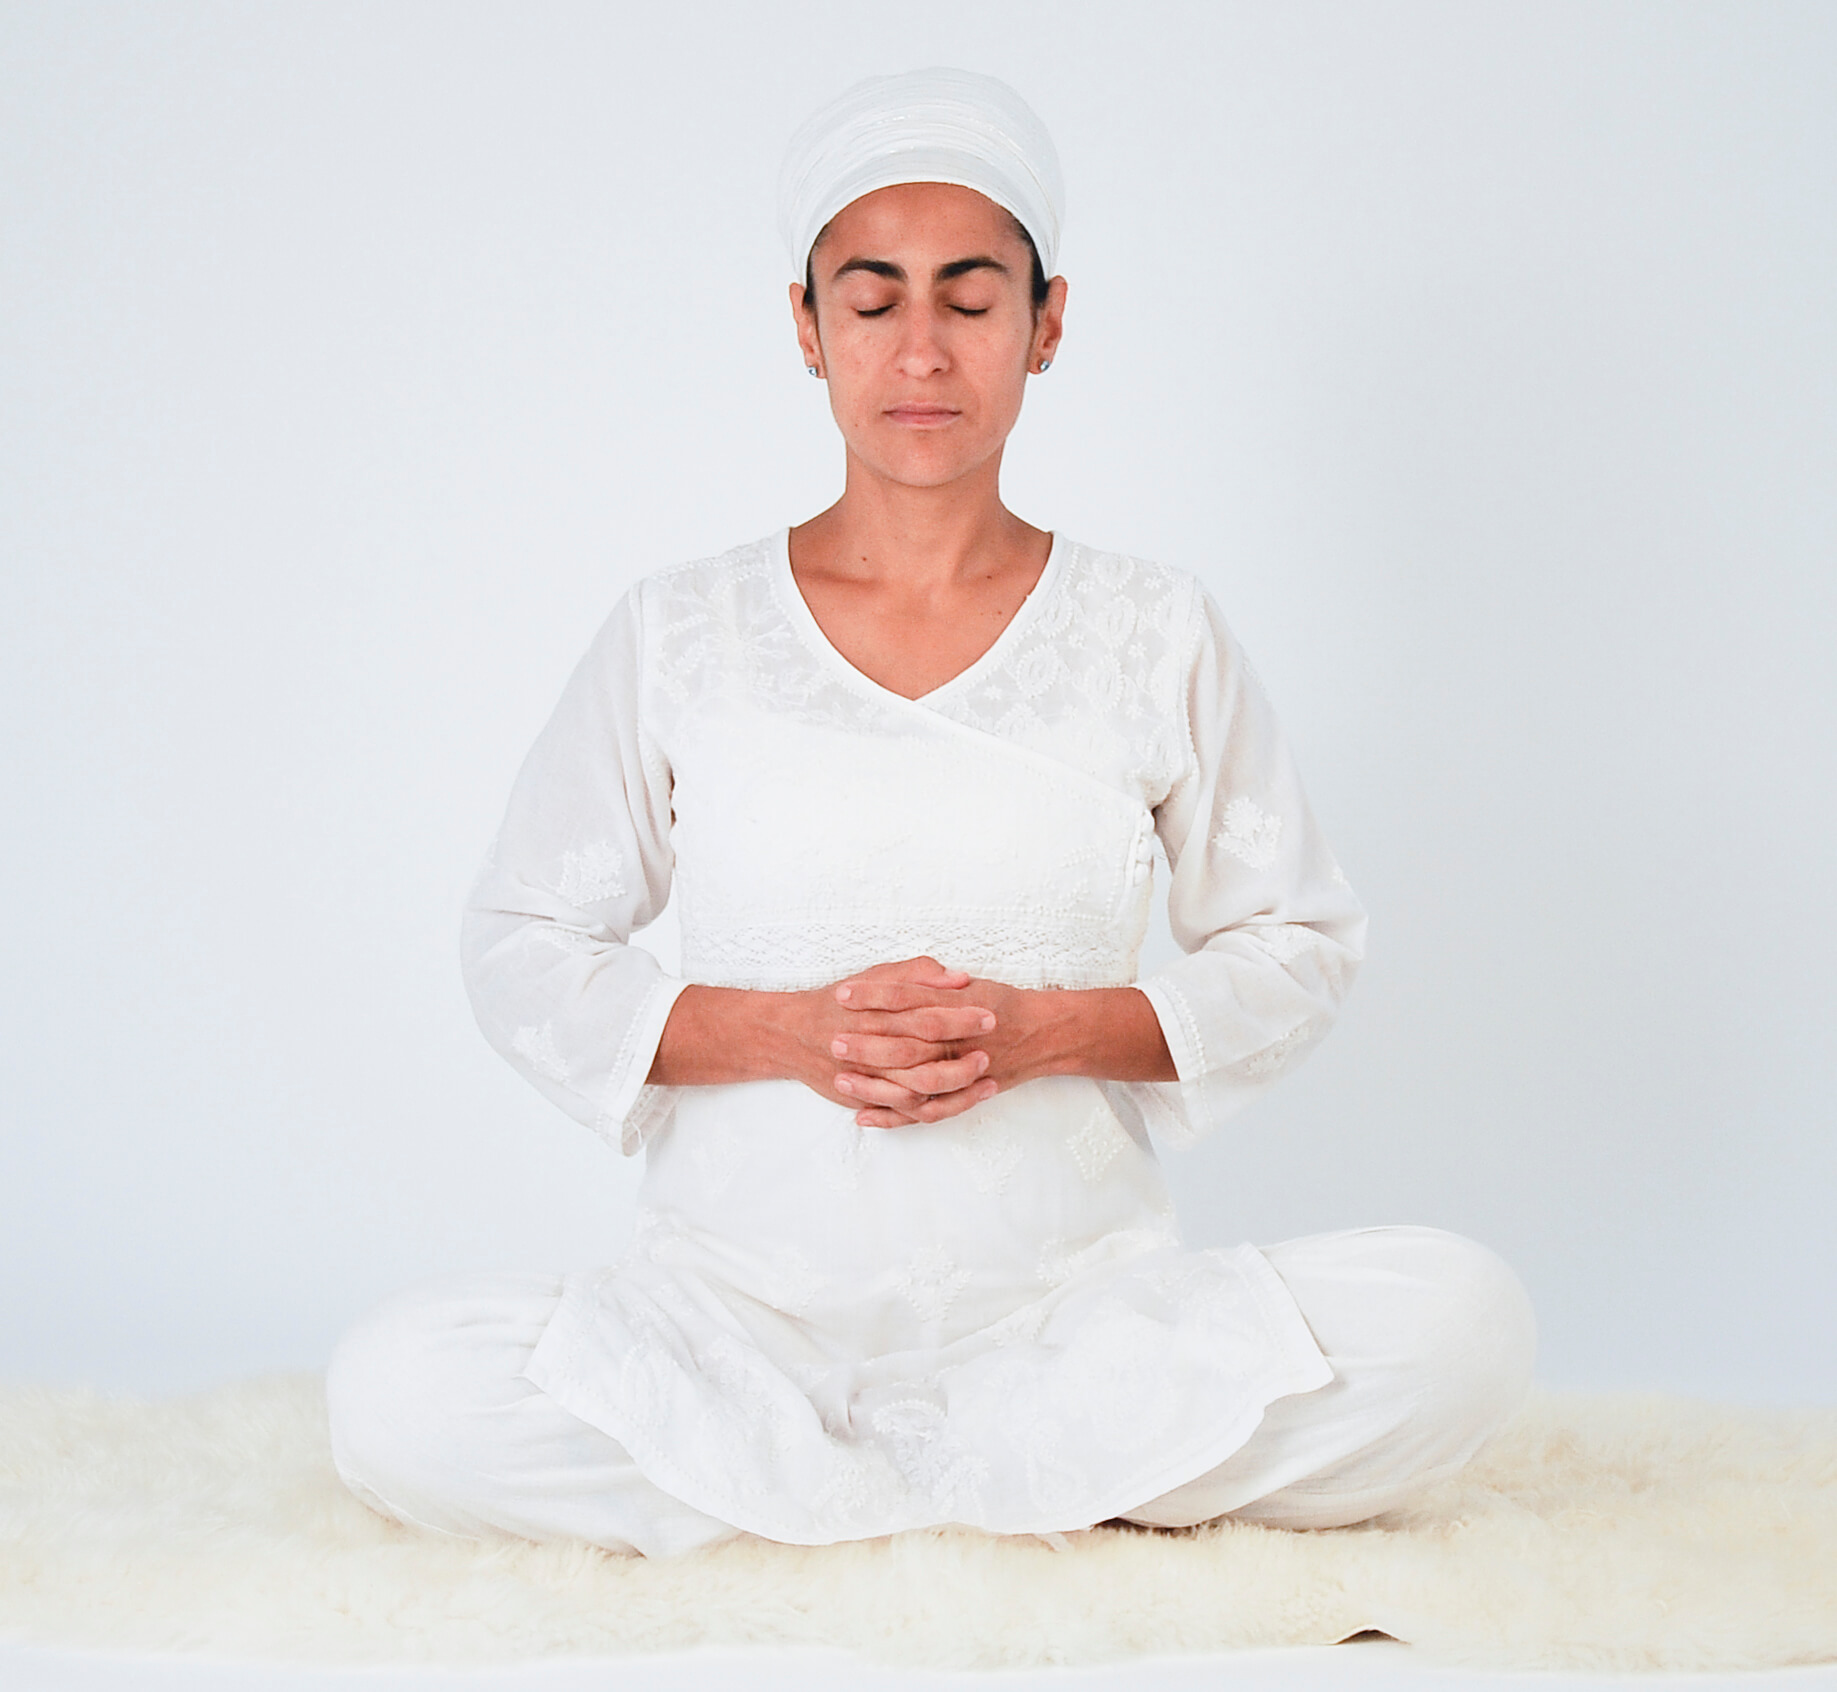 Meditation to Prevent Freaking Out